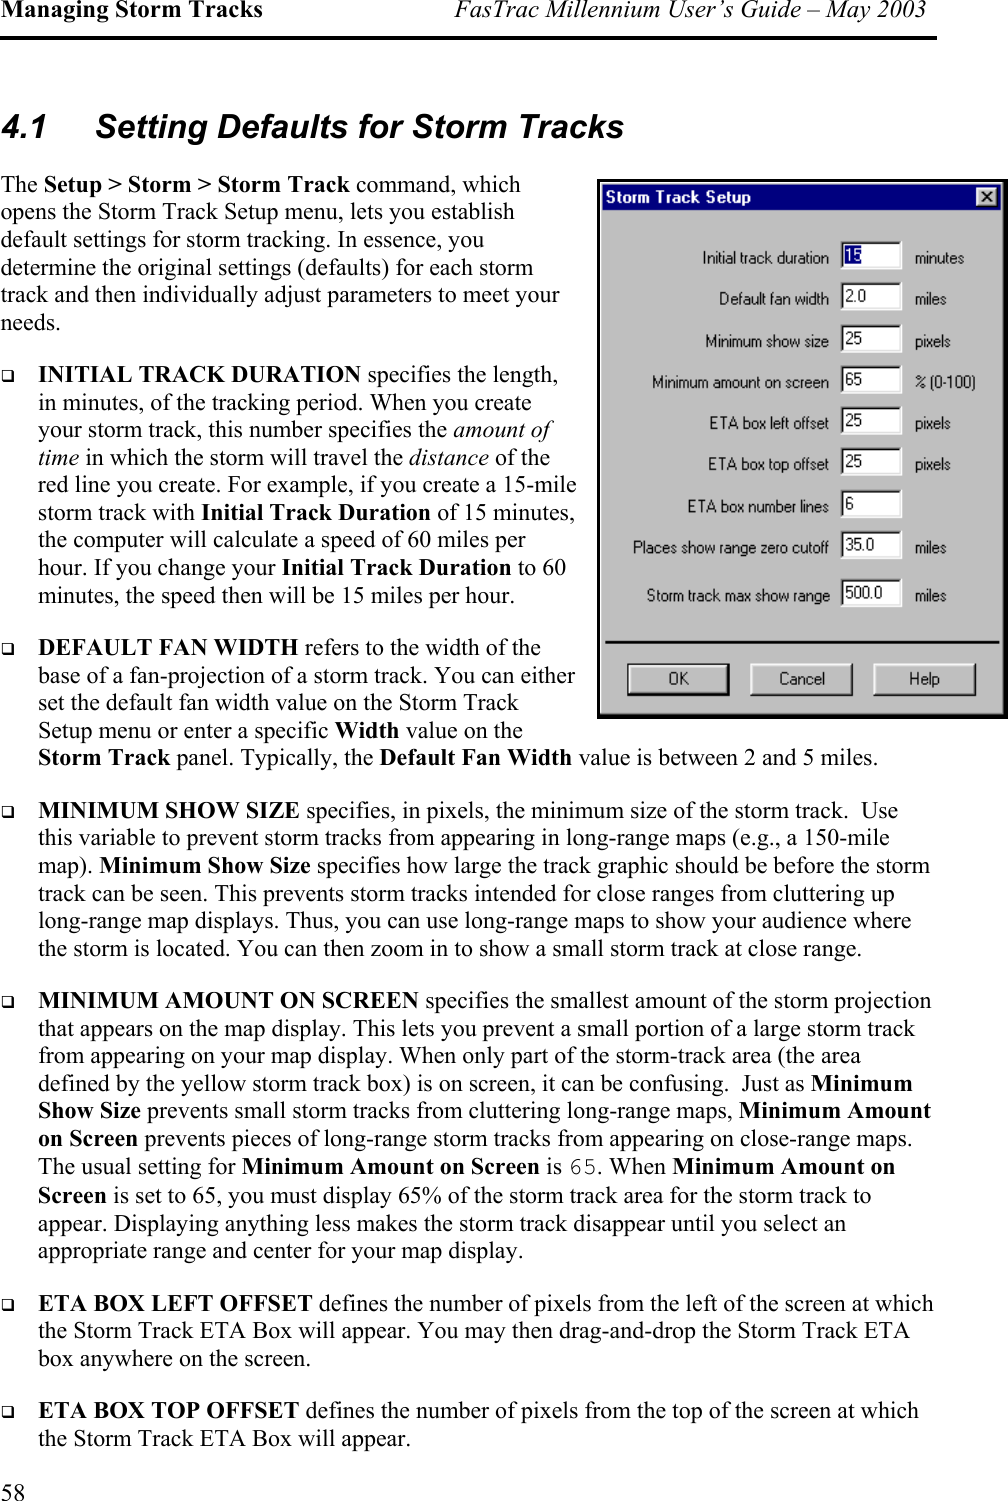 Managing Storm Tracks  FasTrac Millennium User’s Guide – May 2003 4.1  Setting Defaults for Storm Tracks The Setup &gt; Storm &gt; Storm Track command, which opens the Storm Track Setup menu, lets you establish default settings for storm tracking. In essence, you determine the original settings (defaults) for each storm track and then individually adjust parameters to meet your needs.   INITIAL TRACK DURATION specifies the length, in minutes, of the tracking period. When you create your storm track, this number specifies the amount of time in which the storm will travel the distance of the red line you create. For example, if you create a 15-mile storm track with Initial Track Duration of 15 minutes, the computer will calculate a speed of 60 miles per hour. If you change your Initial Track Duration to 60 minutes, the speed then will be 15 miles per hour.   DEFAULT FAN WIDTH refers to the width of the base of a fan-projection of a storm track. You can either set the default fan width value on the Storm Track Setup menu or enter a specific Width value on the Storm Track panel. Typically, the Default Fan Width value is between 2 and 5 miles.    MINIMUM SHOW SIZE specifies, in pixels, the minimum size of the storm track.  Use this variable to prevent storm tracks from appearing in long-range maps (e.g., a 150-mile map). Minimum Show Size specifies how large the track graphic should be before the storm track can be seen. This prevents storm tracks intended for close ranges from cluttering up long-range map displays. Thus, you can use long-range maps to show your audience where the storm is located. You can then zoom in to show a small storm track at close range.   MINIMUM AMOUNT ON SCREEN specifies the smallest amount of the storm projection that appears on the map display. This lets you prevent a small portion of a large storm track from appearing on your map display. When only part of the storm-track area (the area defined by the yellow storm track box) is on screen, it can be confusing.  Just as Minimum Show Size prevents small storm tracks from cluttering long-range maps, Minimum Amount on Screen prevents pieces of long-range storm tracks from appearing on close-range maps. The usual setting for Minimum Amount on Screen is 65. When Minimum Amount on Screen is set to 65, you must display 65% of the storm track area for the storm track to appear. Displaying anything less makes the storm track disappear until you select an appropriate range and center for your map display.   ETA BOX LEFT OFFSET defines the number of pixels from the left of the screen at which the Storm Track ETA Box will appear. You may then drag-and-drop the Storm Track ETA box anywhere on the screen.   ETA BOX TOP OFFSET defines the number of pixels from the top of the screen at which the Storm Track ETA Box will appear.  58 